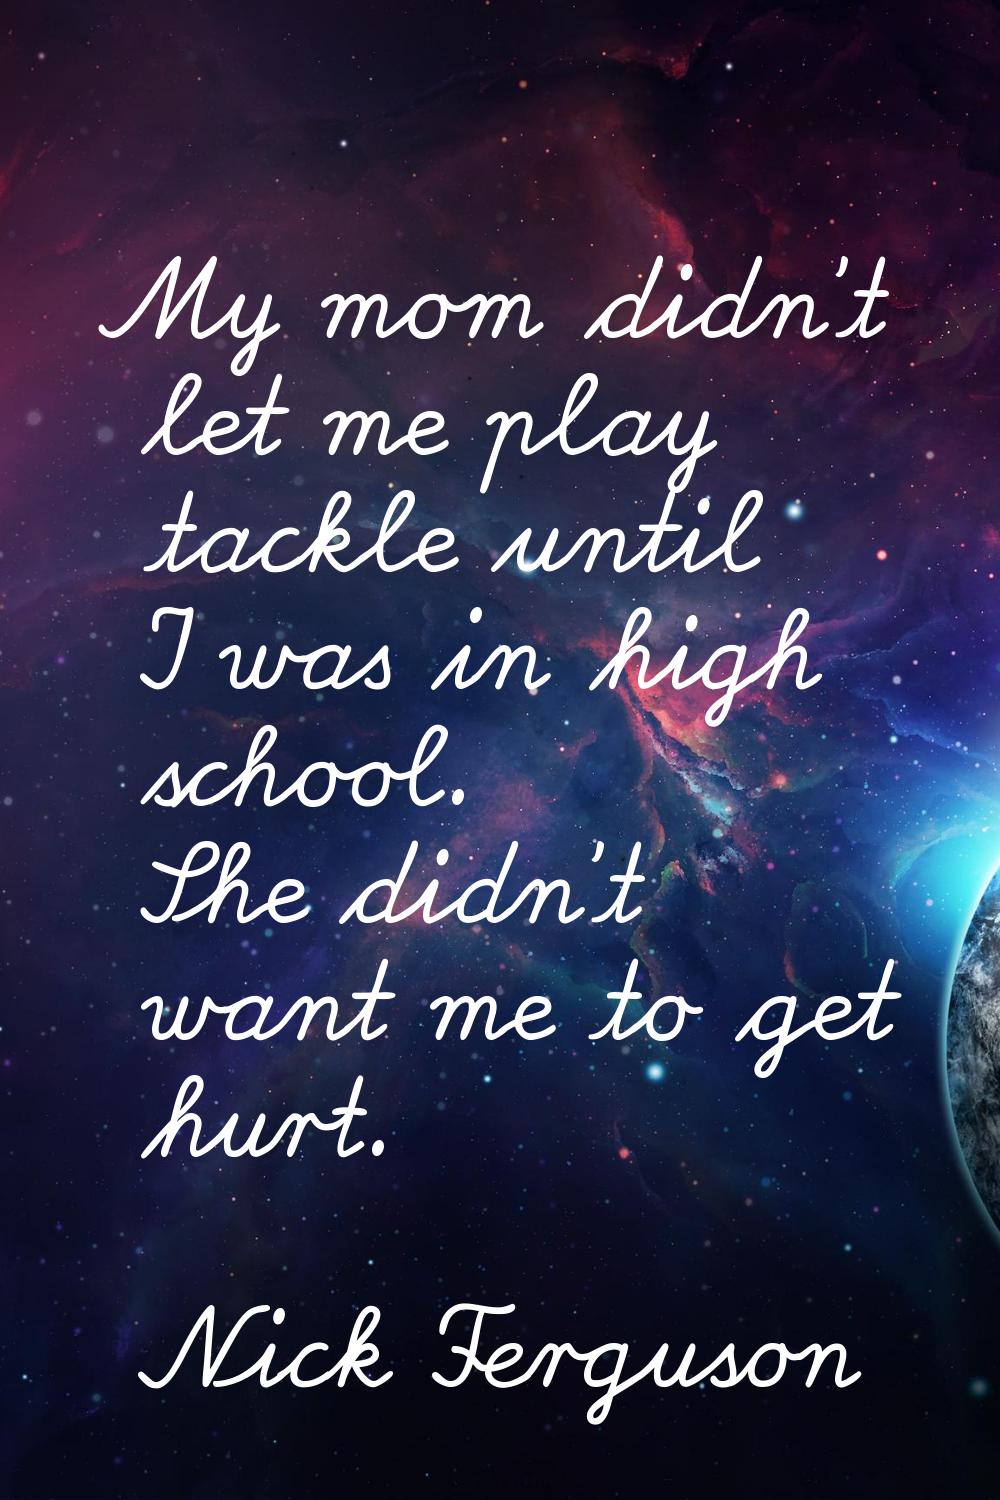 My mom didn't let me play tackle until I was in high school. She didn't want me to get hurt.